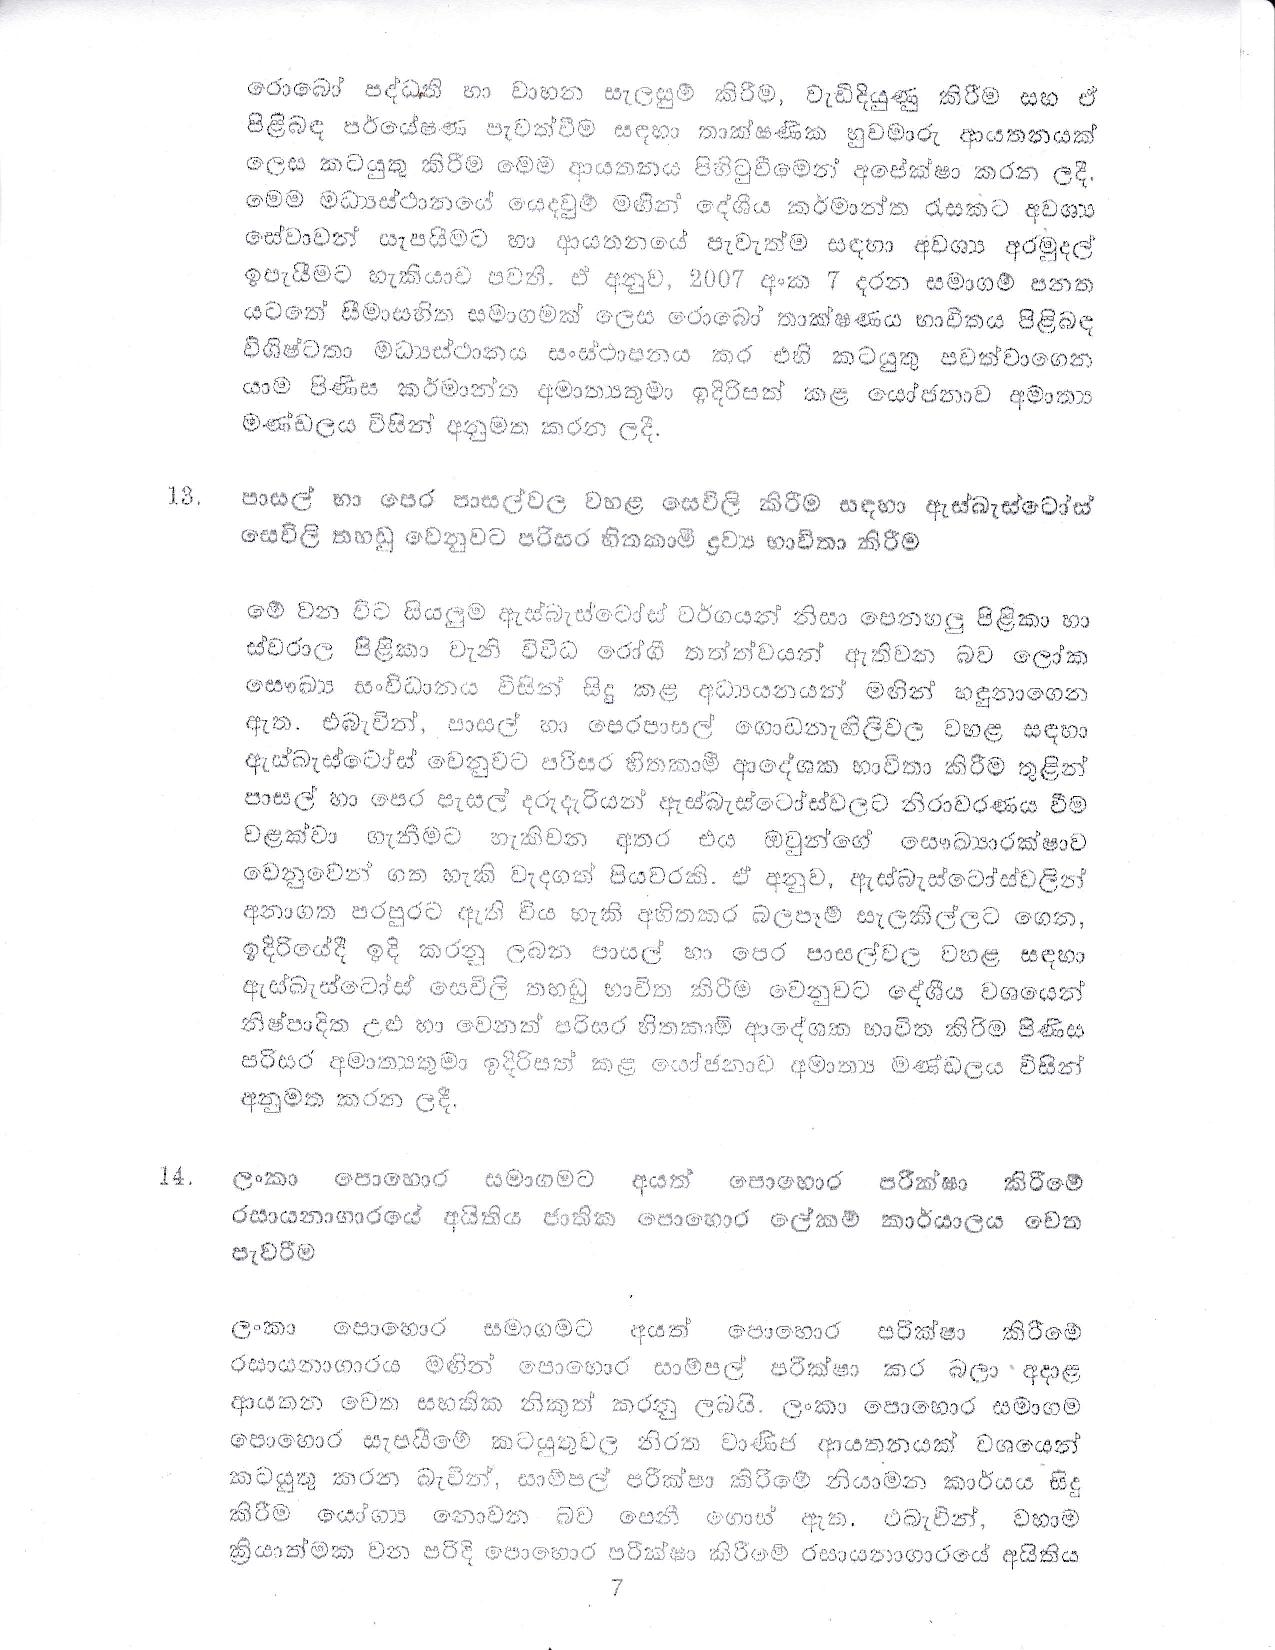 Cabinet Decision on 16.11.2020 page 007